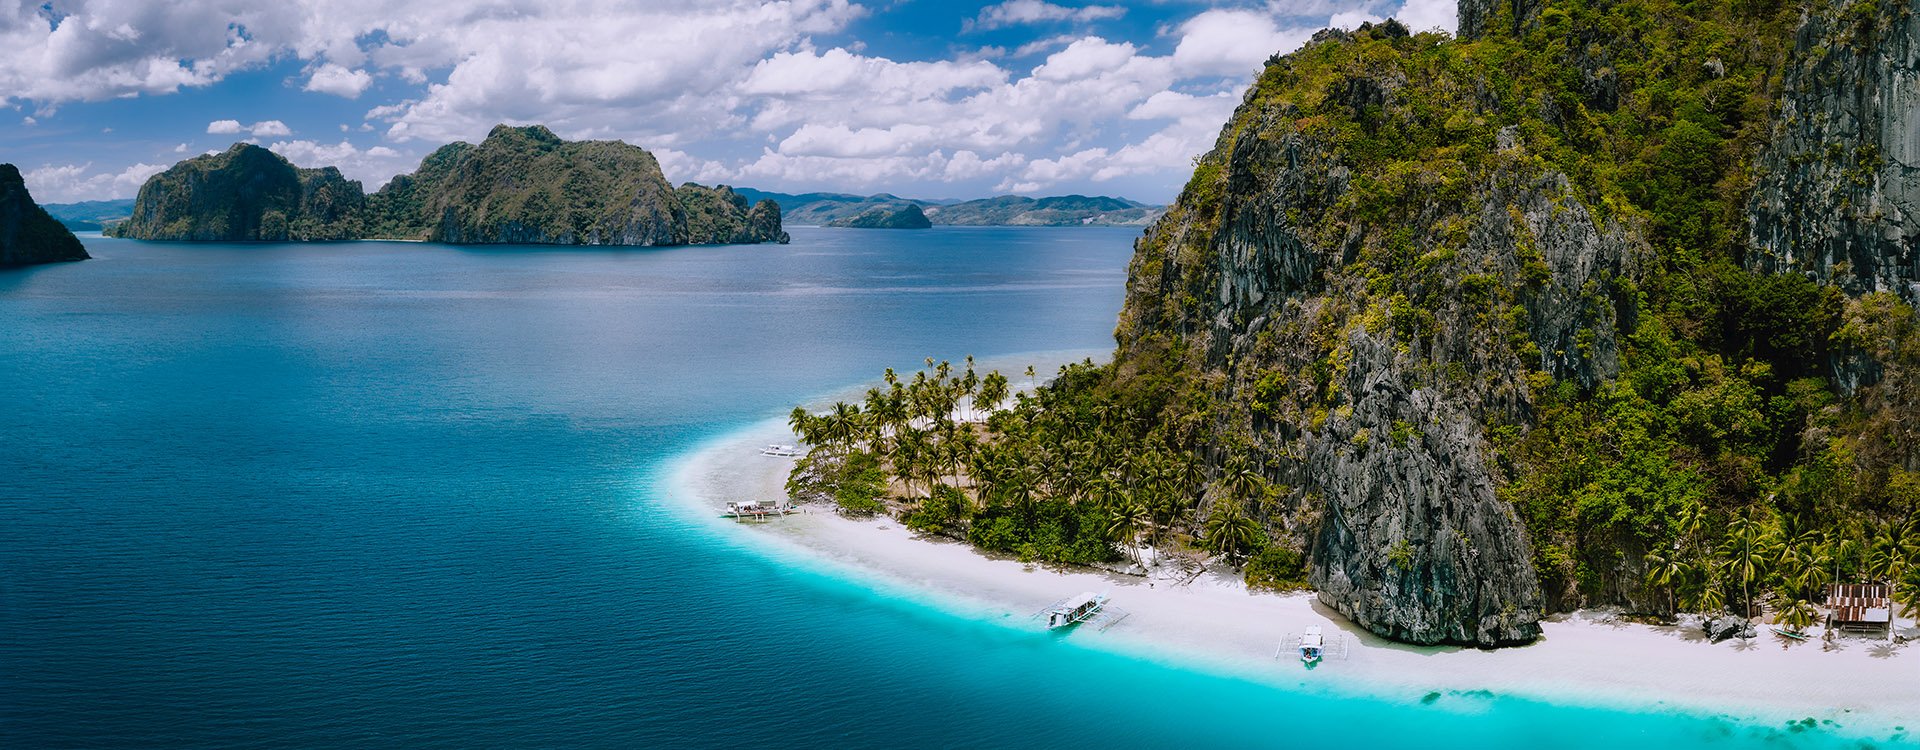 El Nido, Palawan, Philippines. White sand beaches and blue ocean water